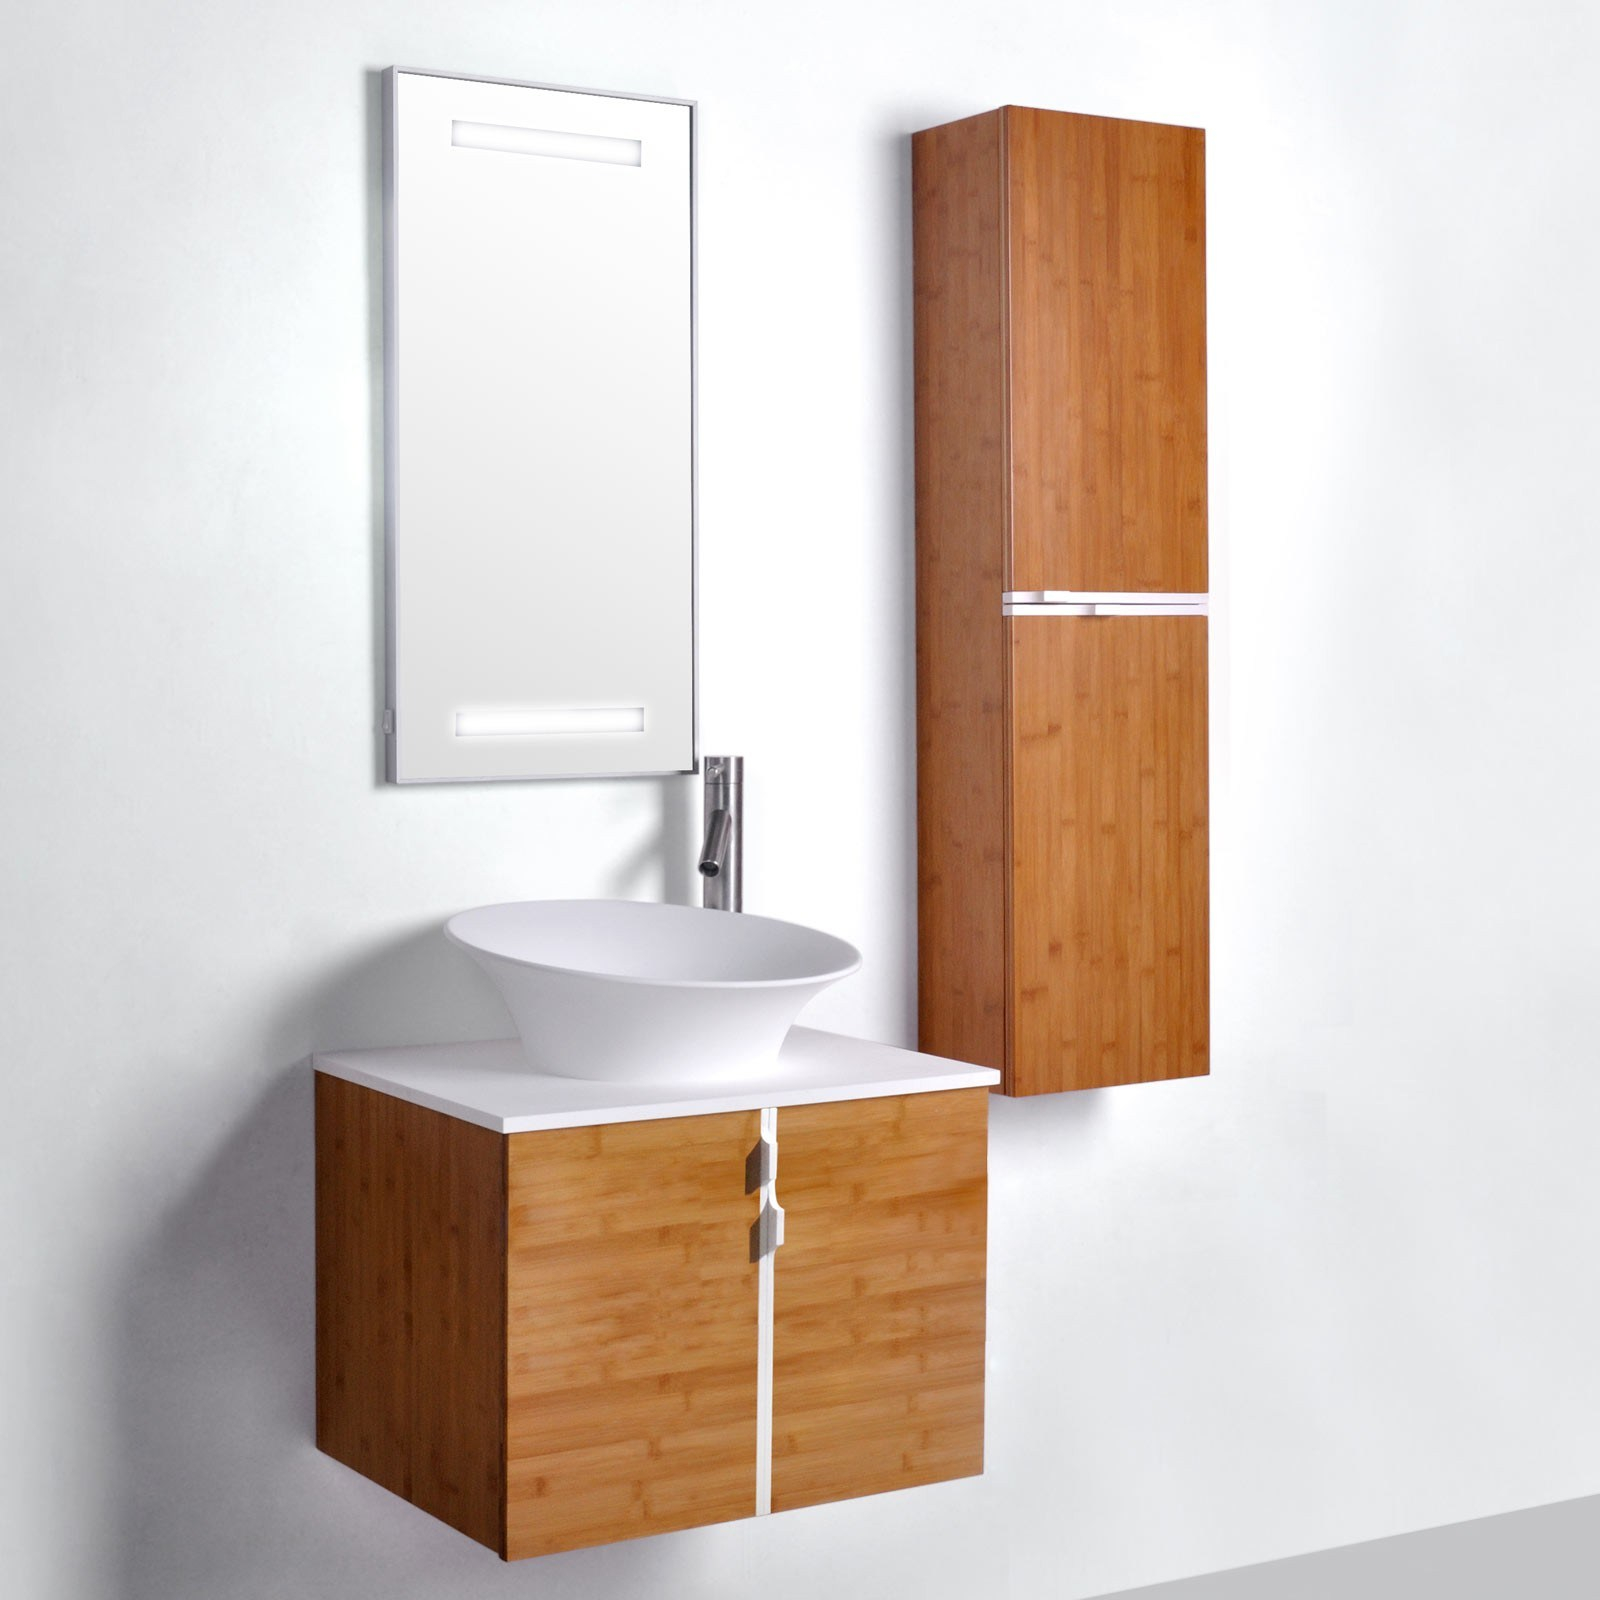 Bamboo Bathroom Cabinets Bamboo Kitchen Cabinets Pictures Ideas in sizing 1600 X 1600